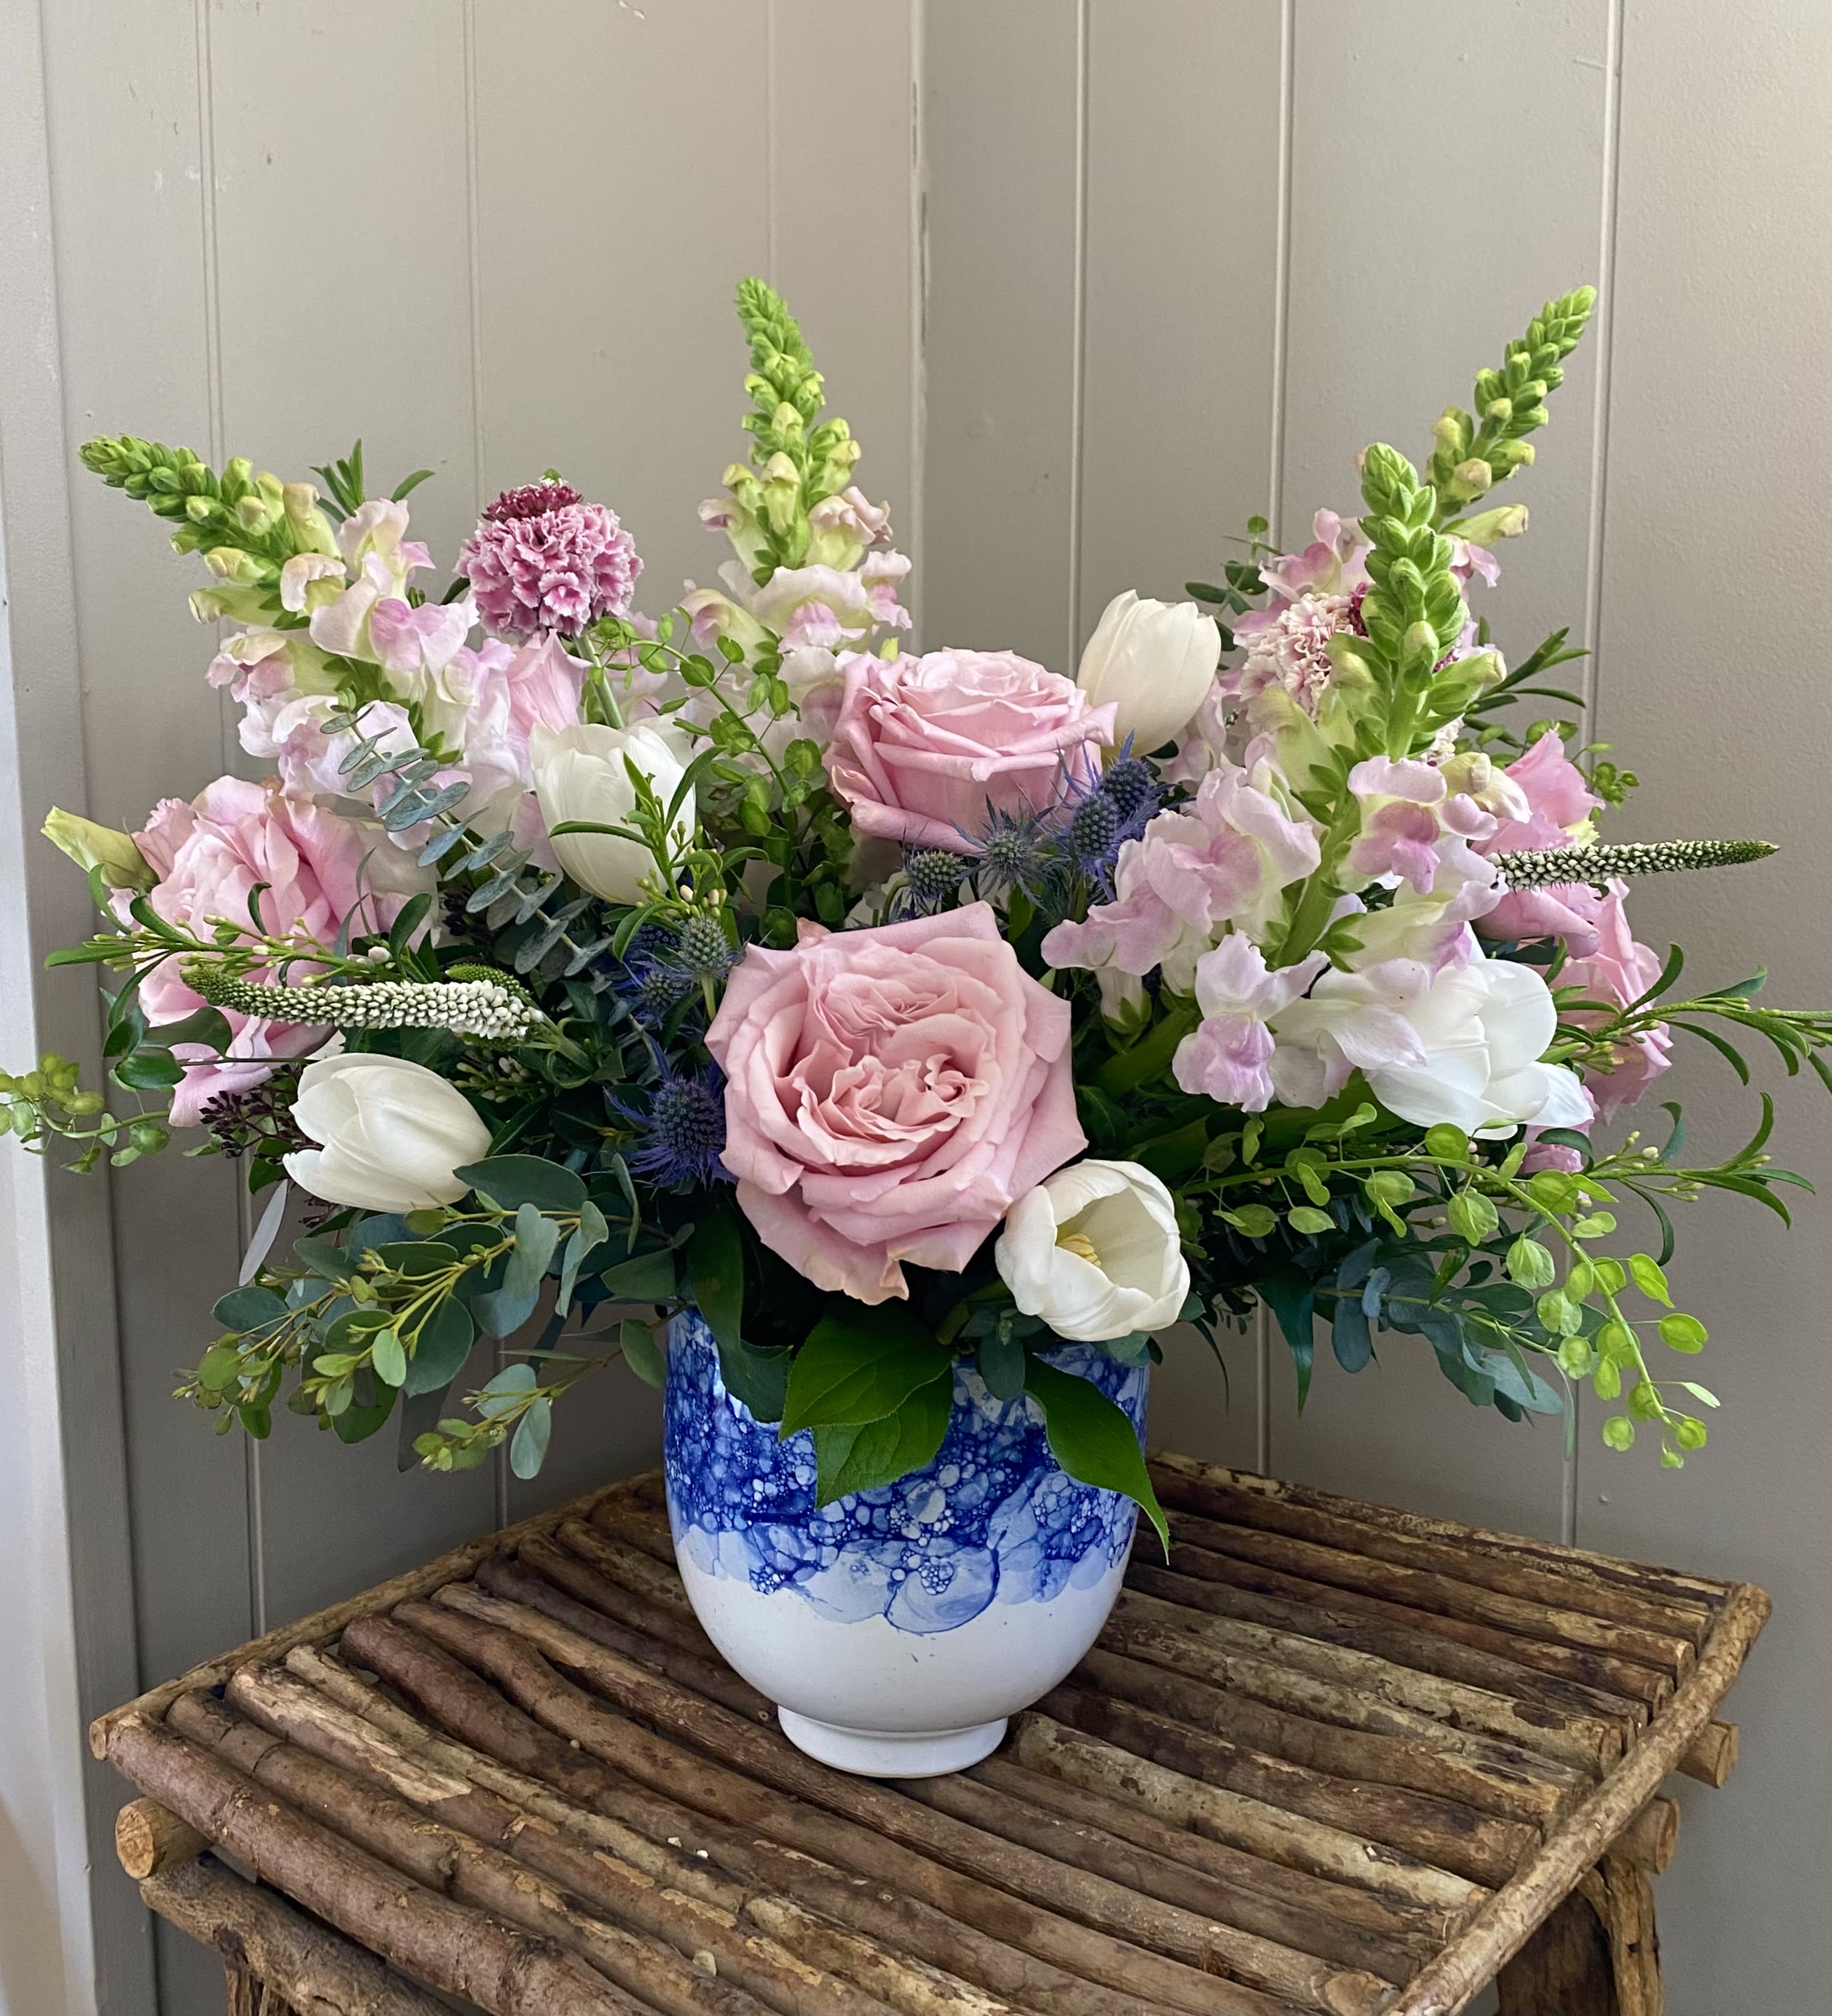 Sweet Spring Time - This lovely garden assortment of snapdragons, tulips, lisianthus, scabiosa, roses and more is sure to bring spring time indoors!